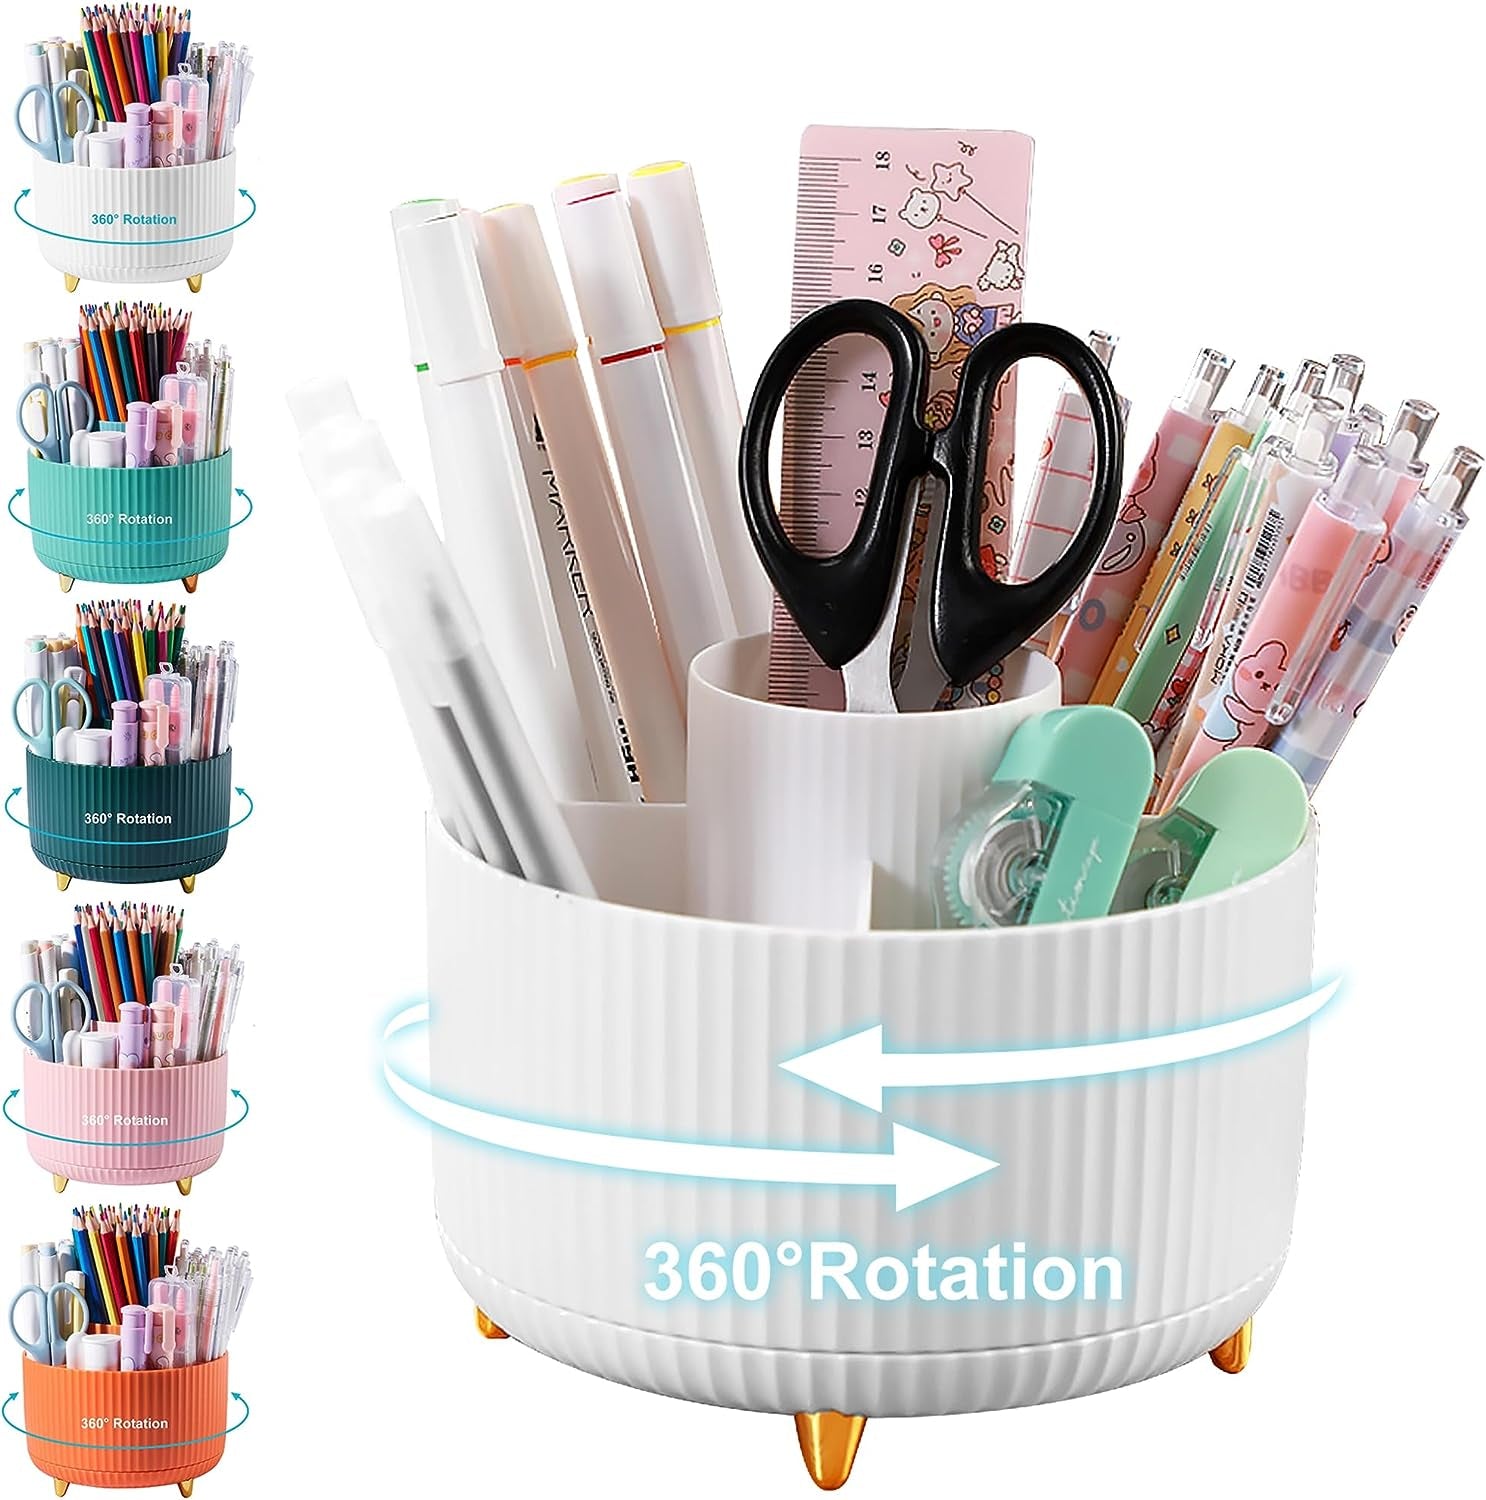 Pencil Holder for Desk,5 Slots 360°Degree Rotating Desk Organizers and Accessories,Desktop Storage Stationery Supplies Organizer, Cute Pencil Cup Pot for Office, School, Home (B-White)